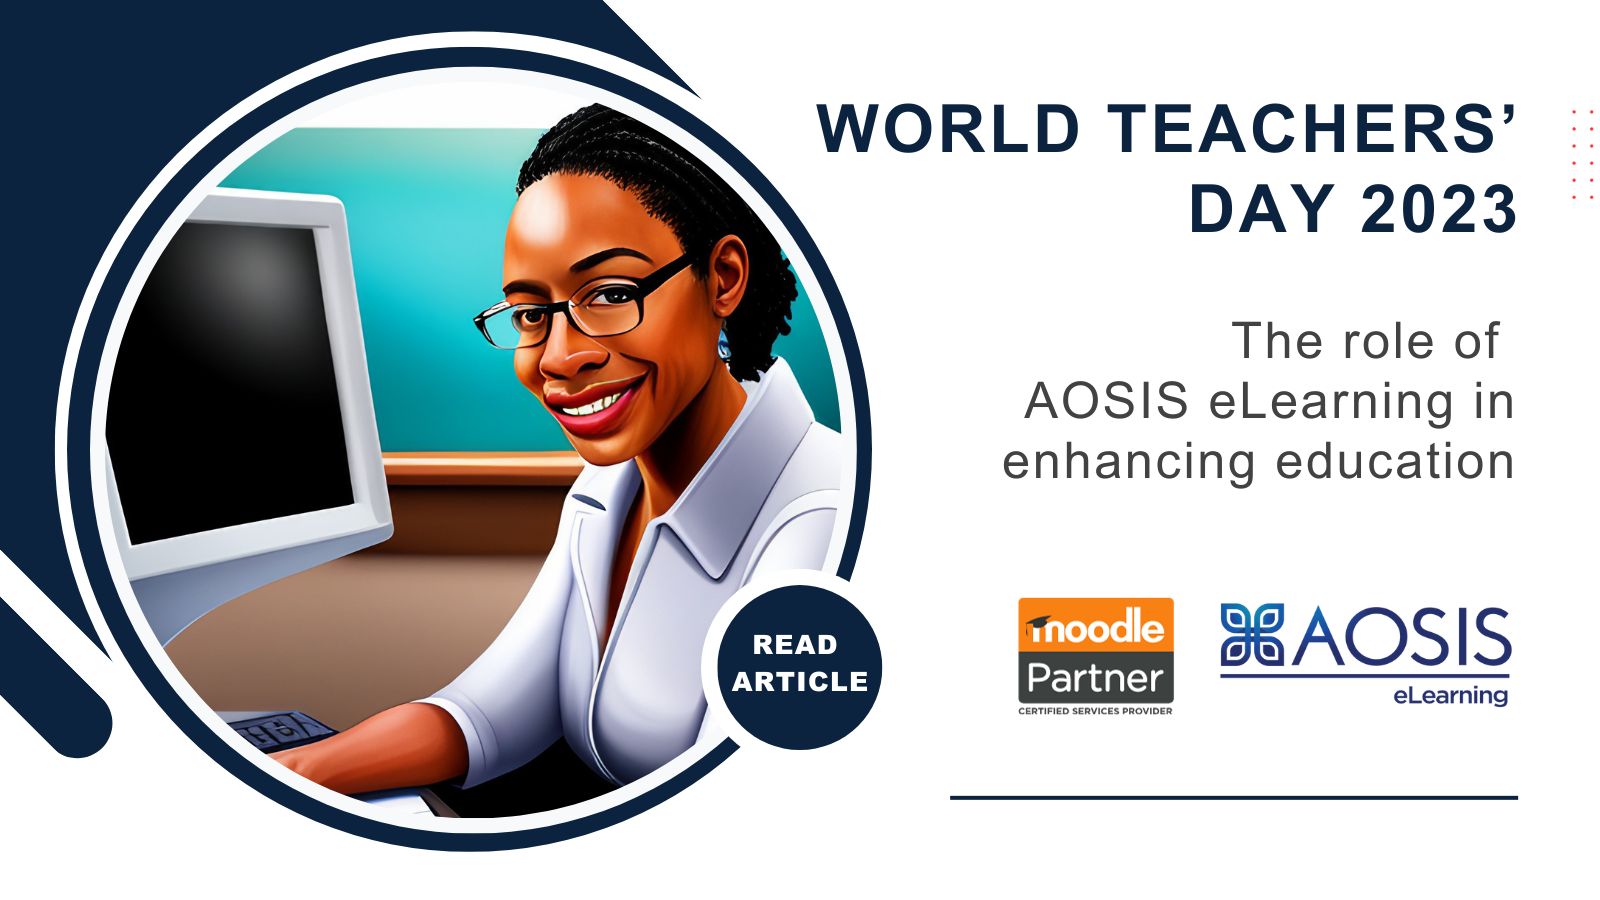 World Teachers’ Day 2023: The role of AOSIS eLearning in enhancing education 